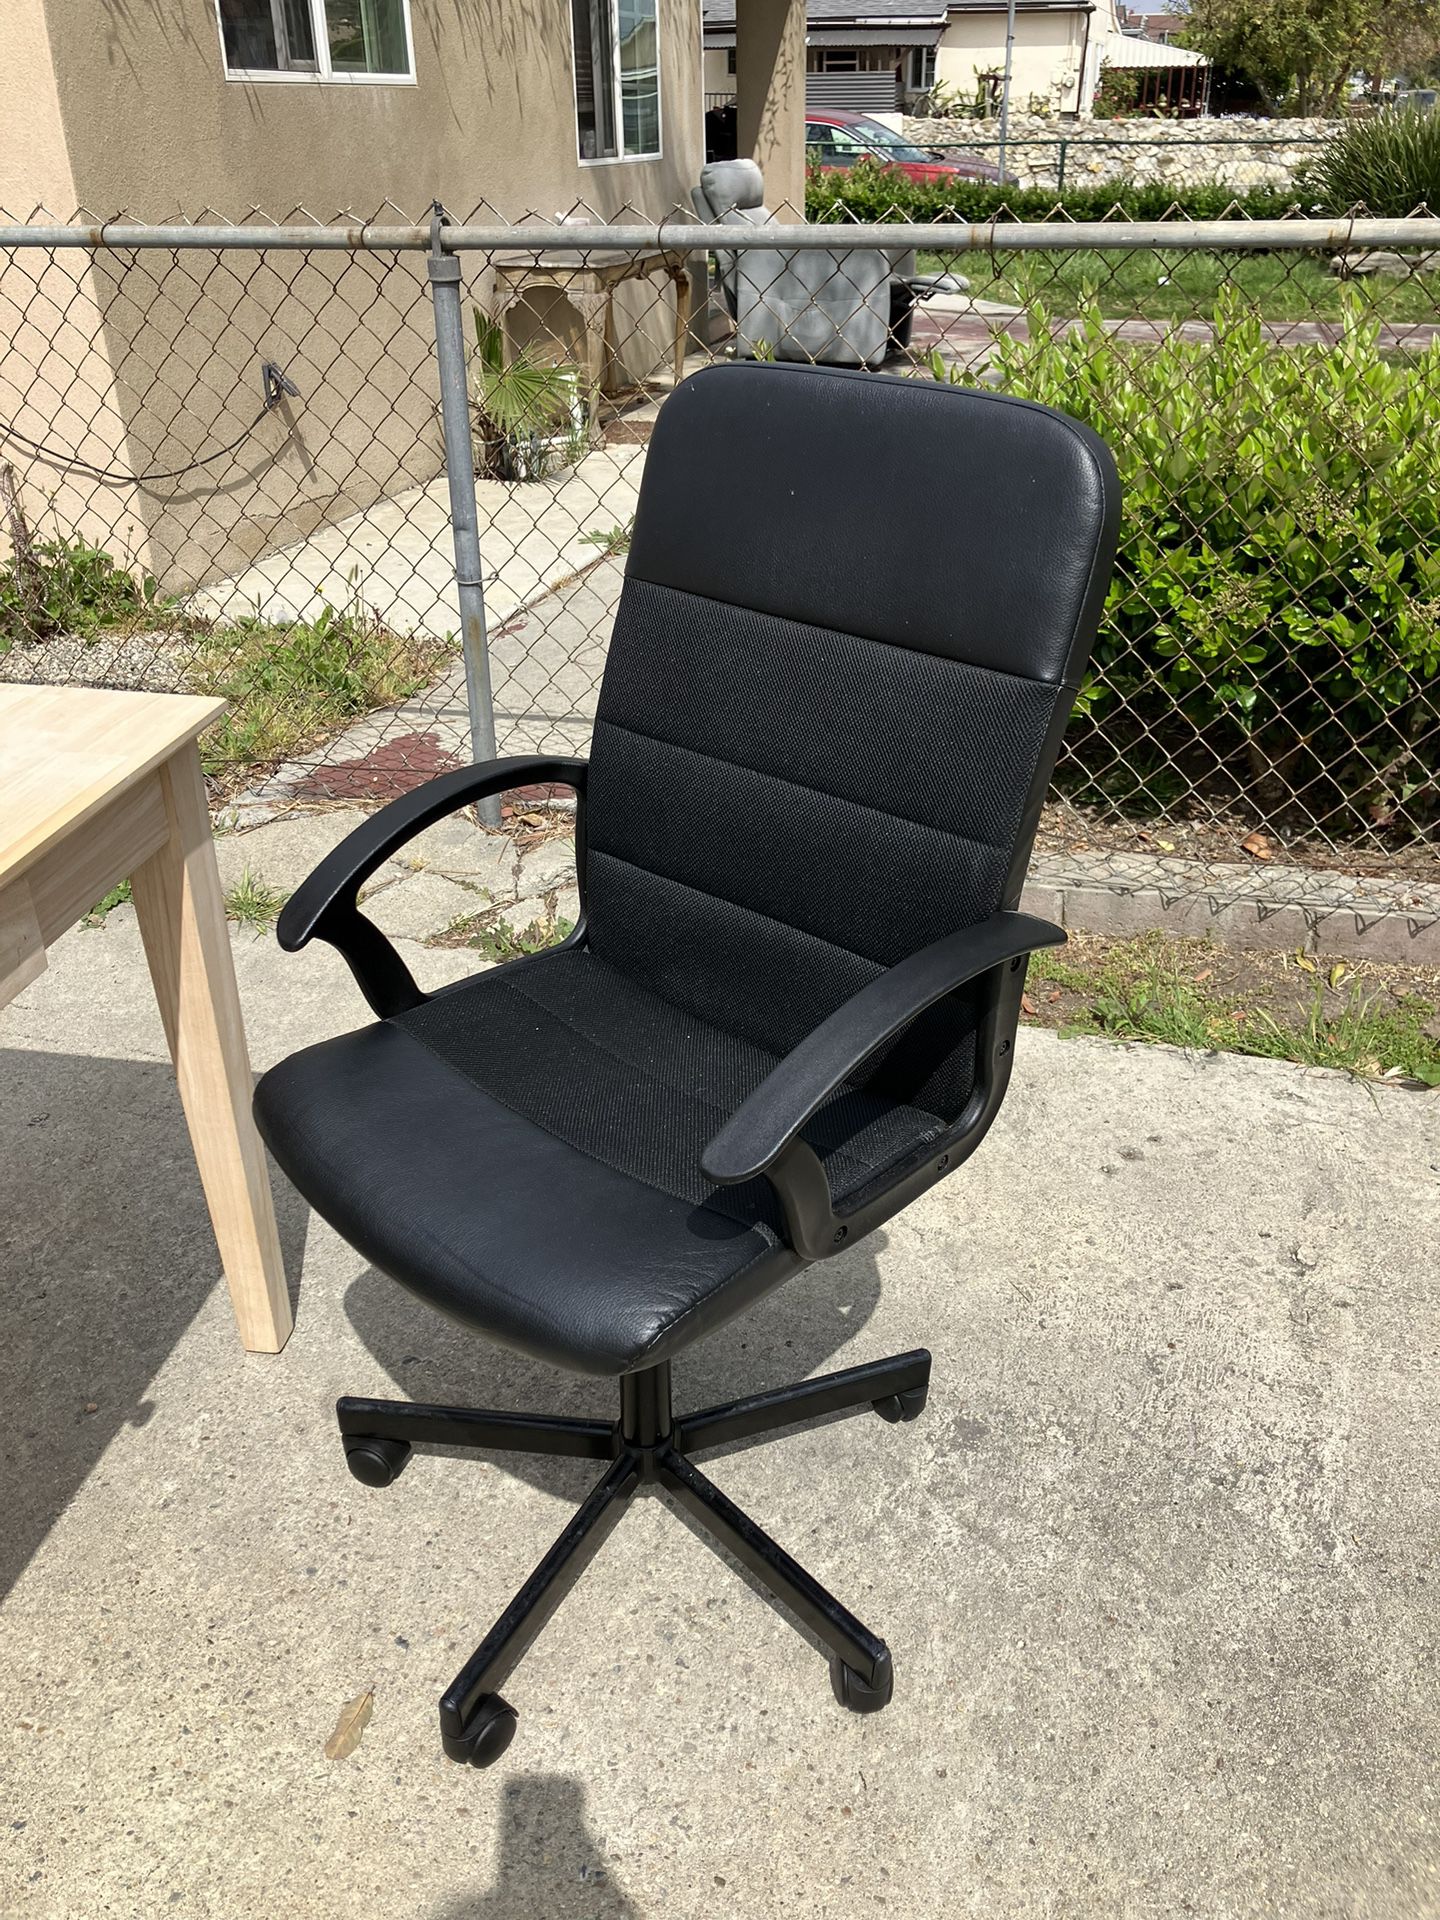 Great condition! Office Rolling Chair Black